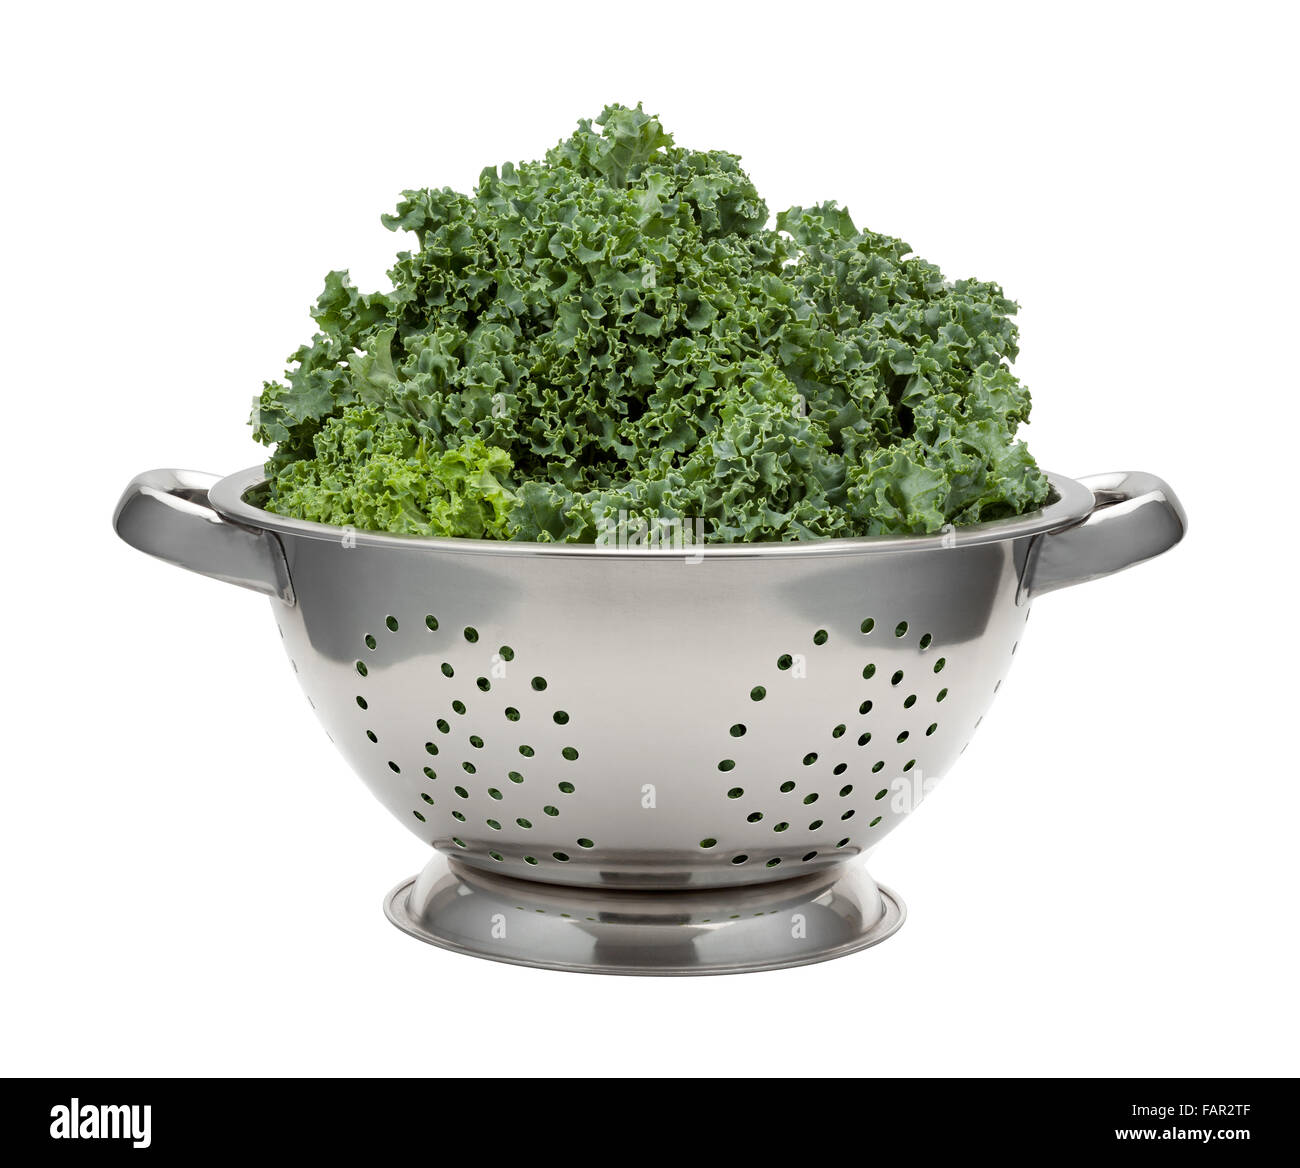 Fresh Kale in a Stainless Steel Colander Stock Photo